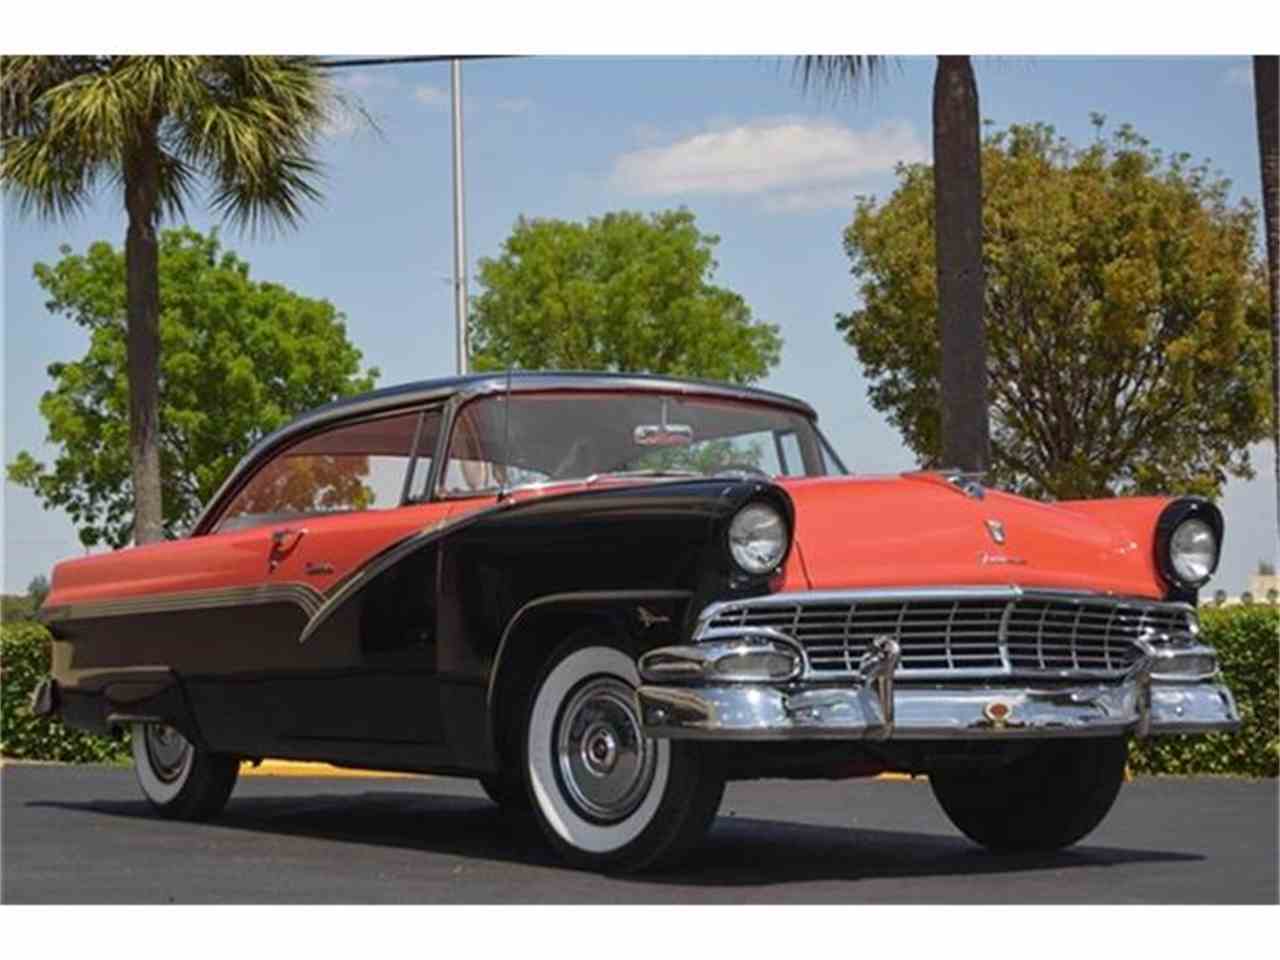 Amazing 1956 Ford Victoria Pictures & Backgrounds